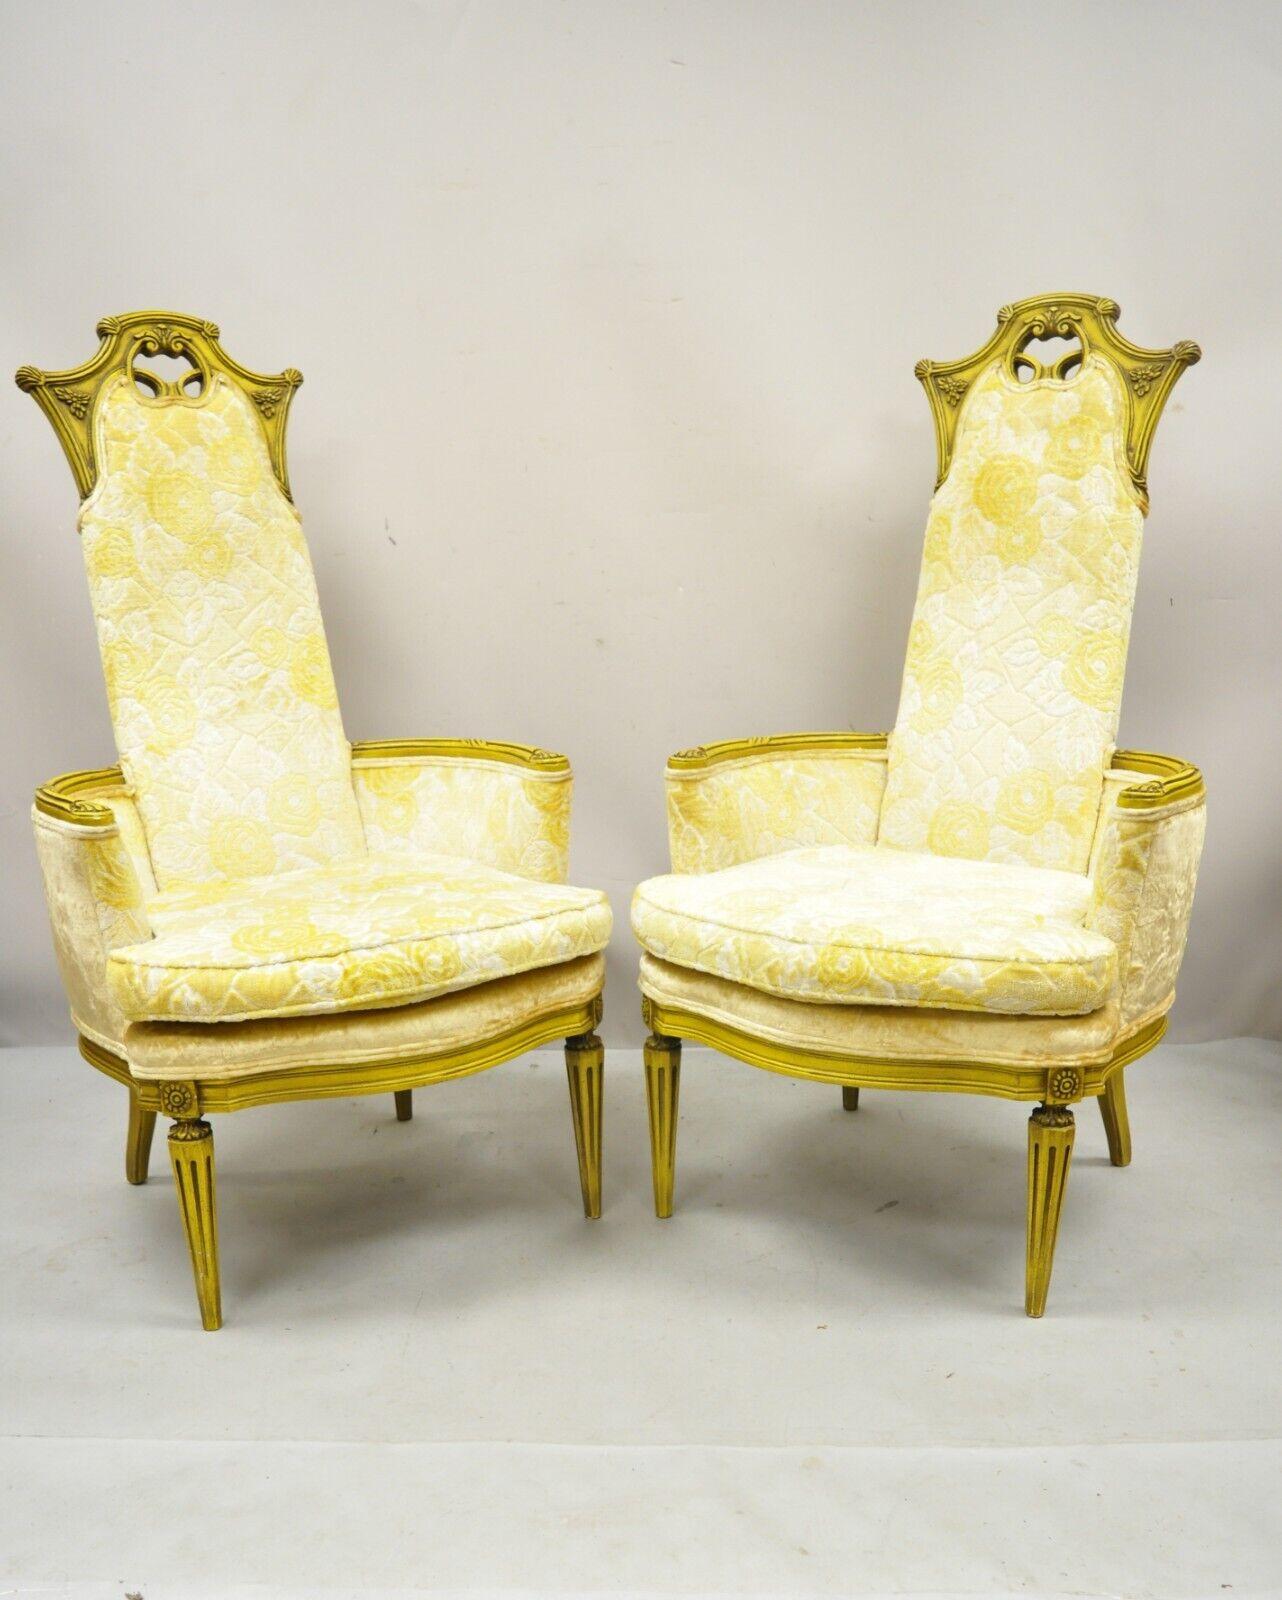 Vintage French Hollywood Regency Yellow Fireside Lounge Chairs - a Pair. Item features yellow painted original finish, yellow fabric, solid wood frame, tapered legs, very nice vintage pair, great style and form. Circa mid 20th century. Measurements: